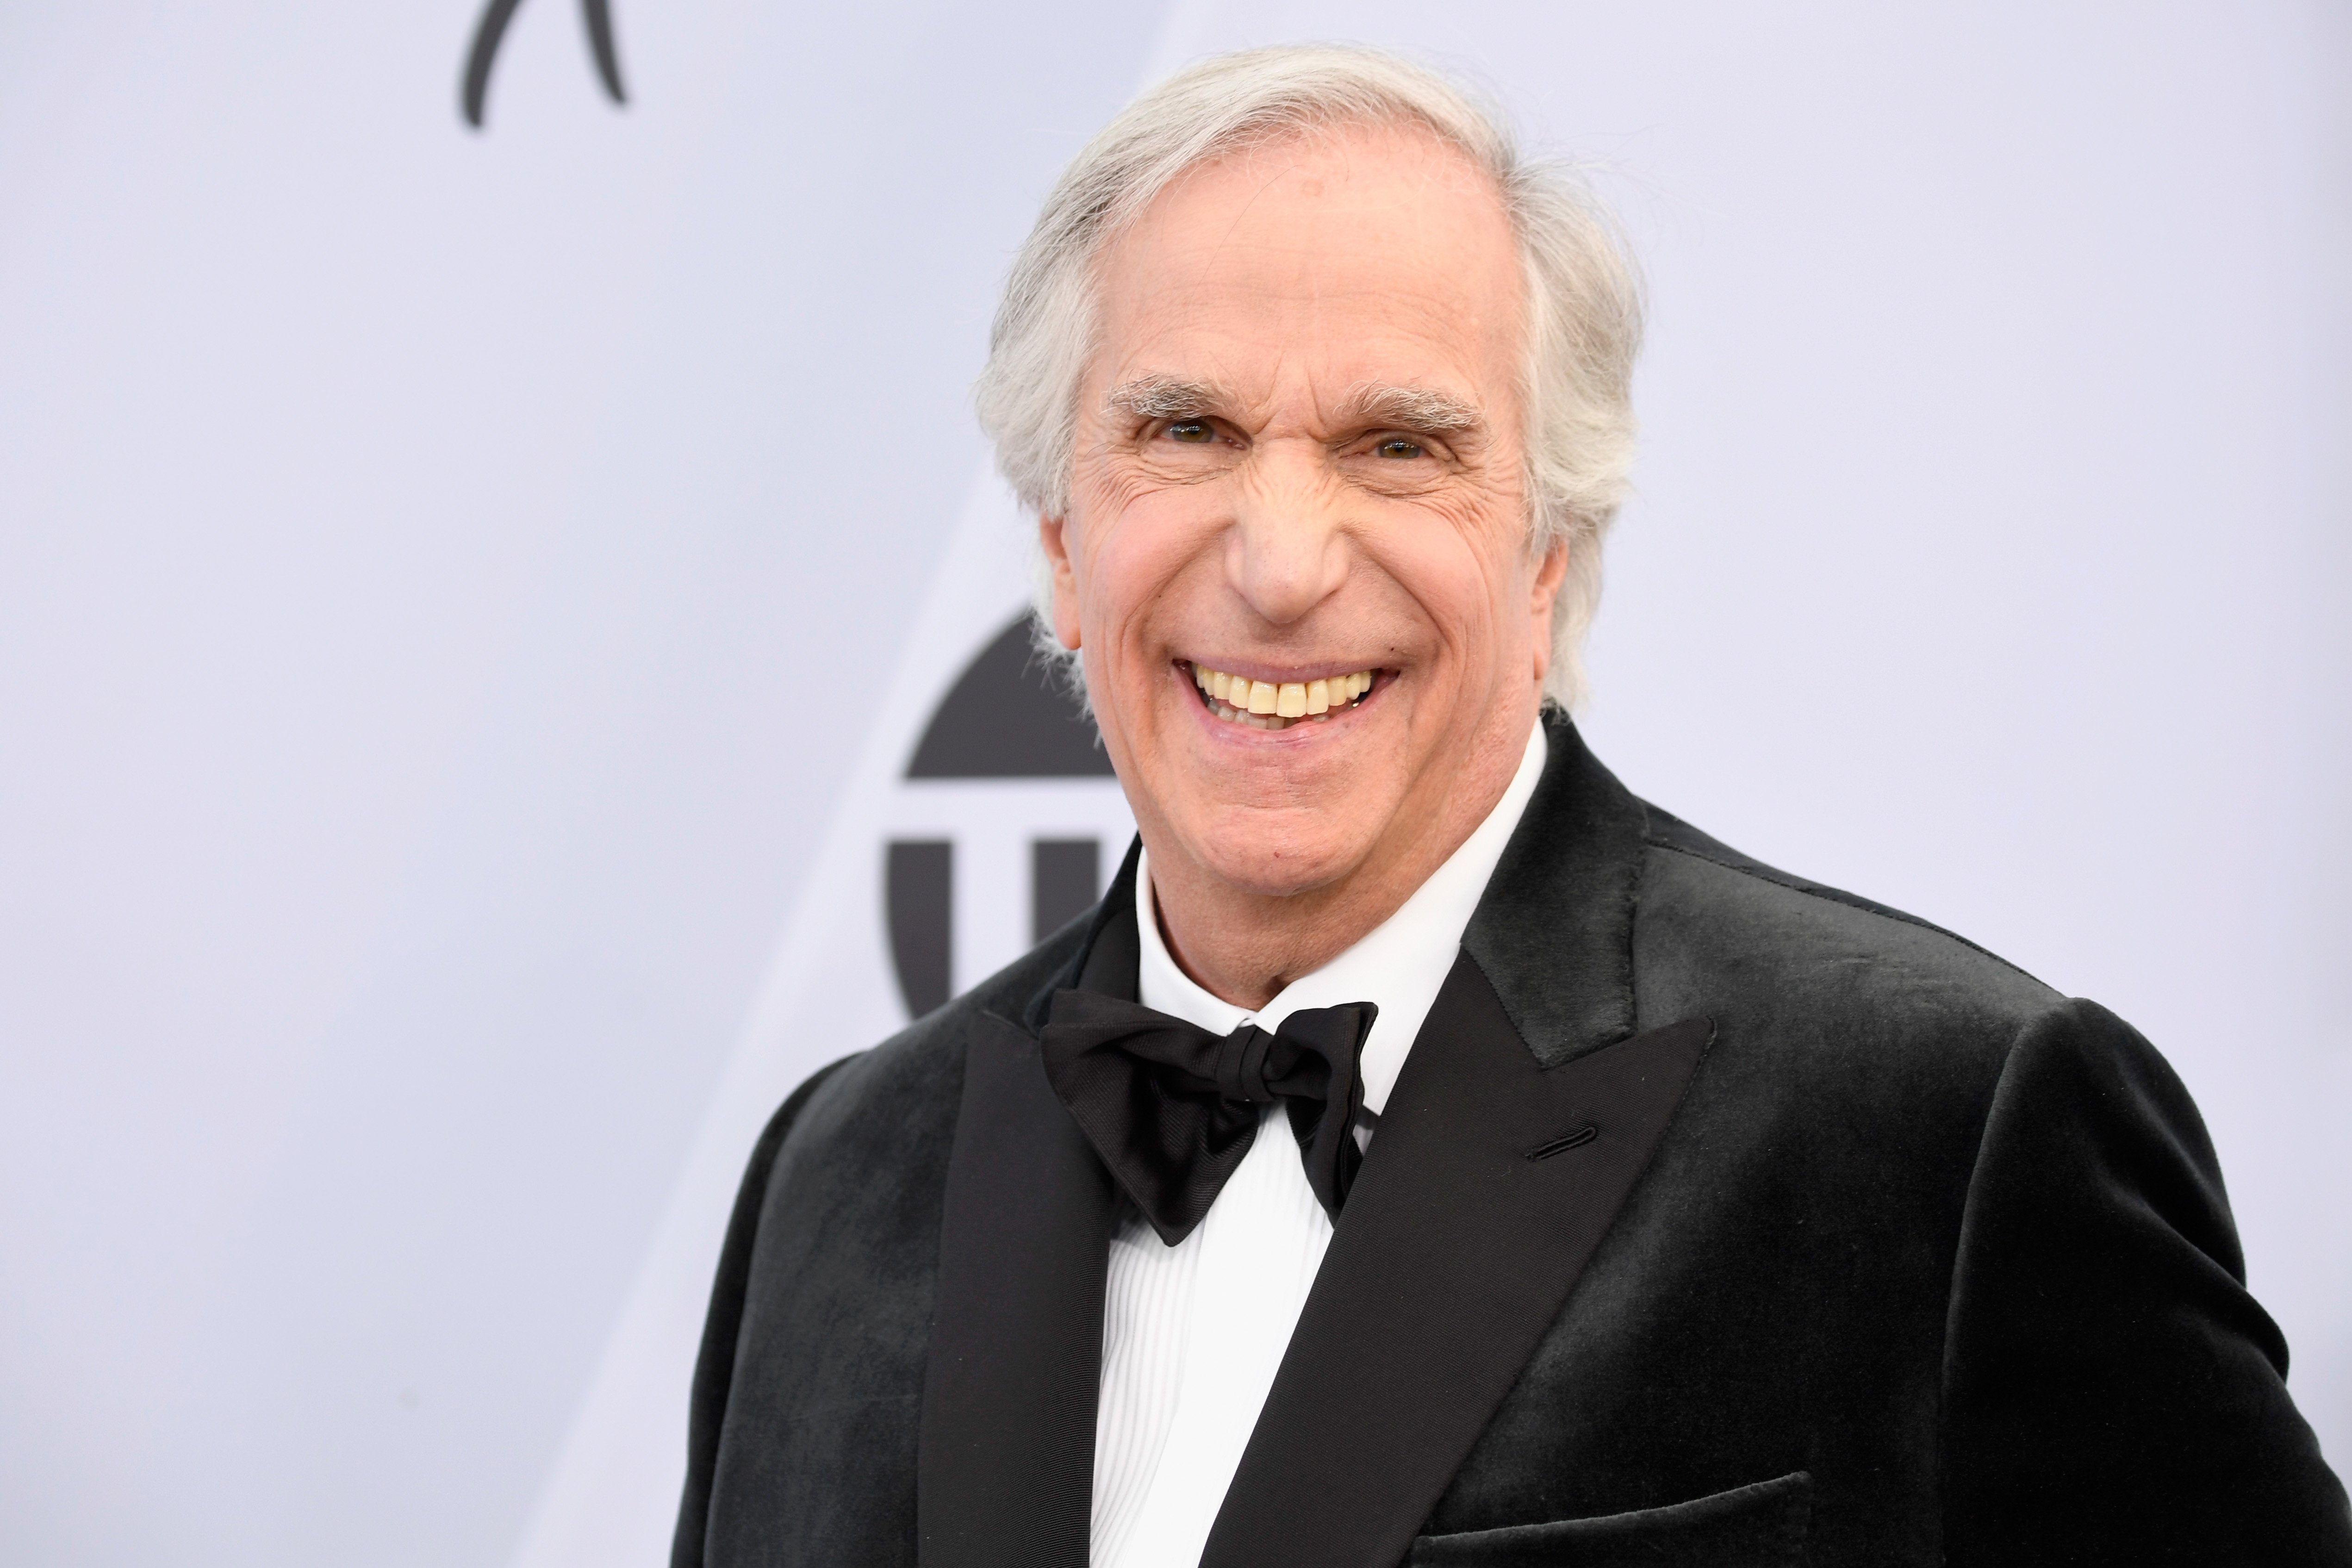 Henry Winkler attends the 25th Annual Screen Actors Guild Awards at The Shrine Auditorium in Los Angeles, California | Source: Getty Images